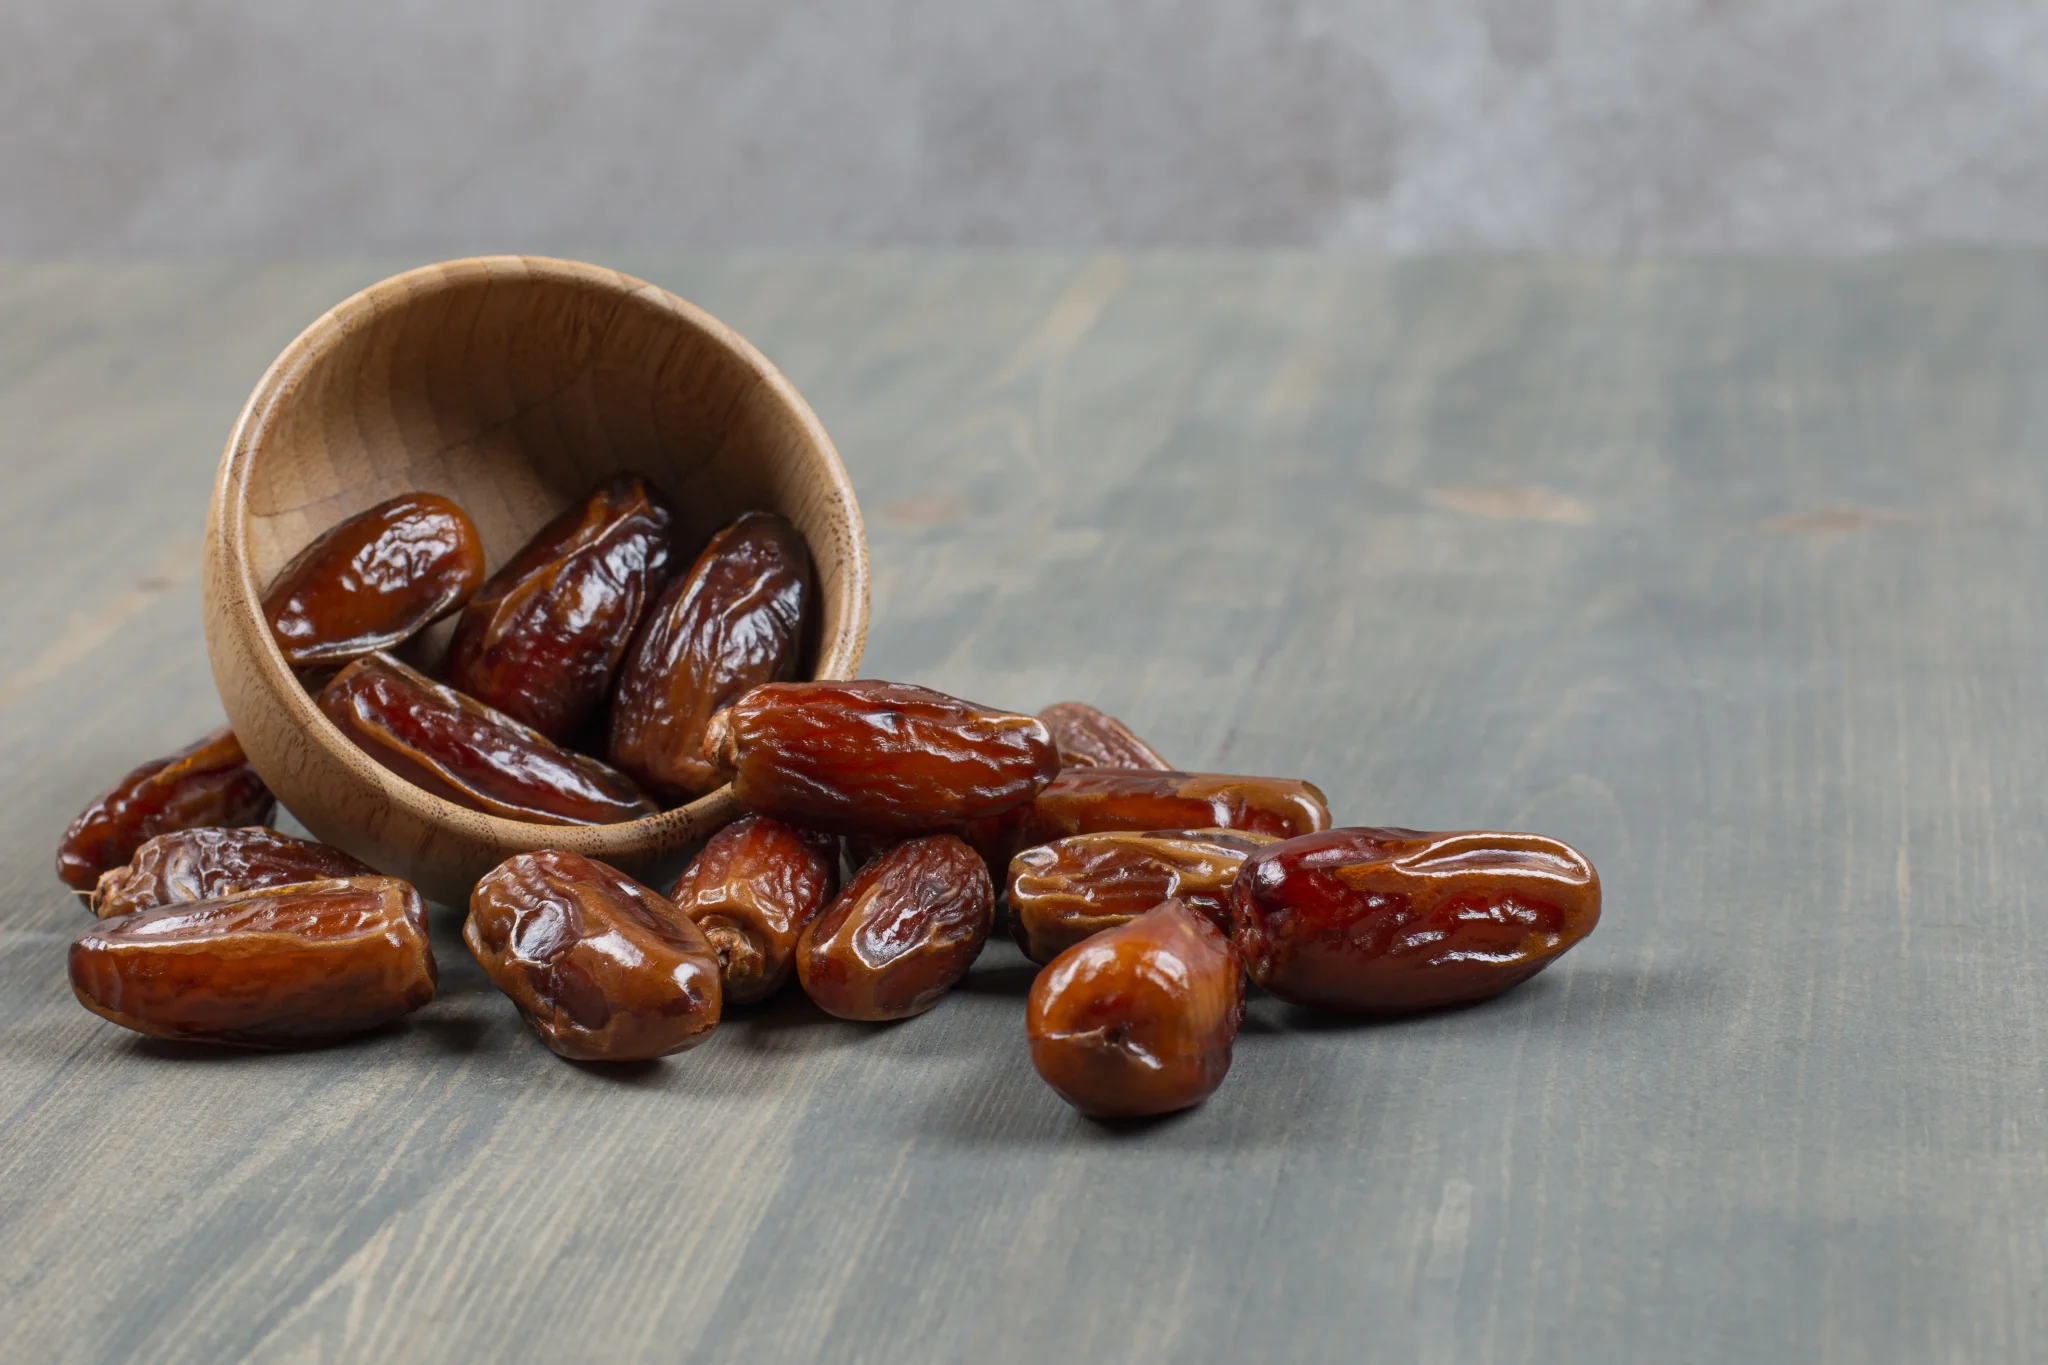 Selling all kinds of organic dates